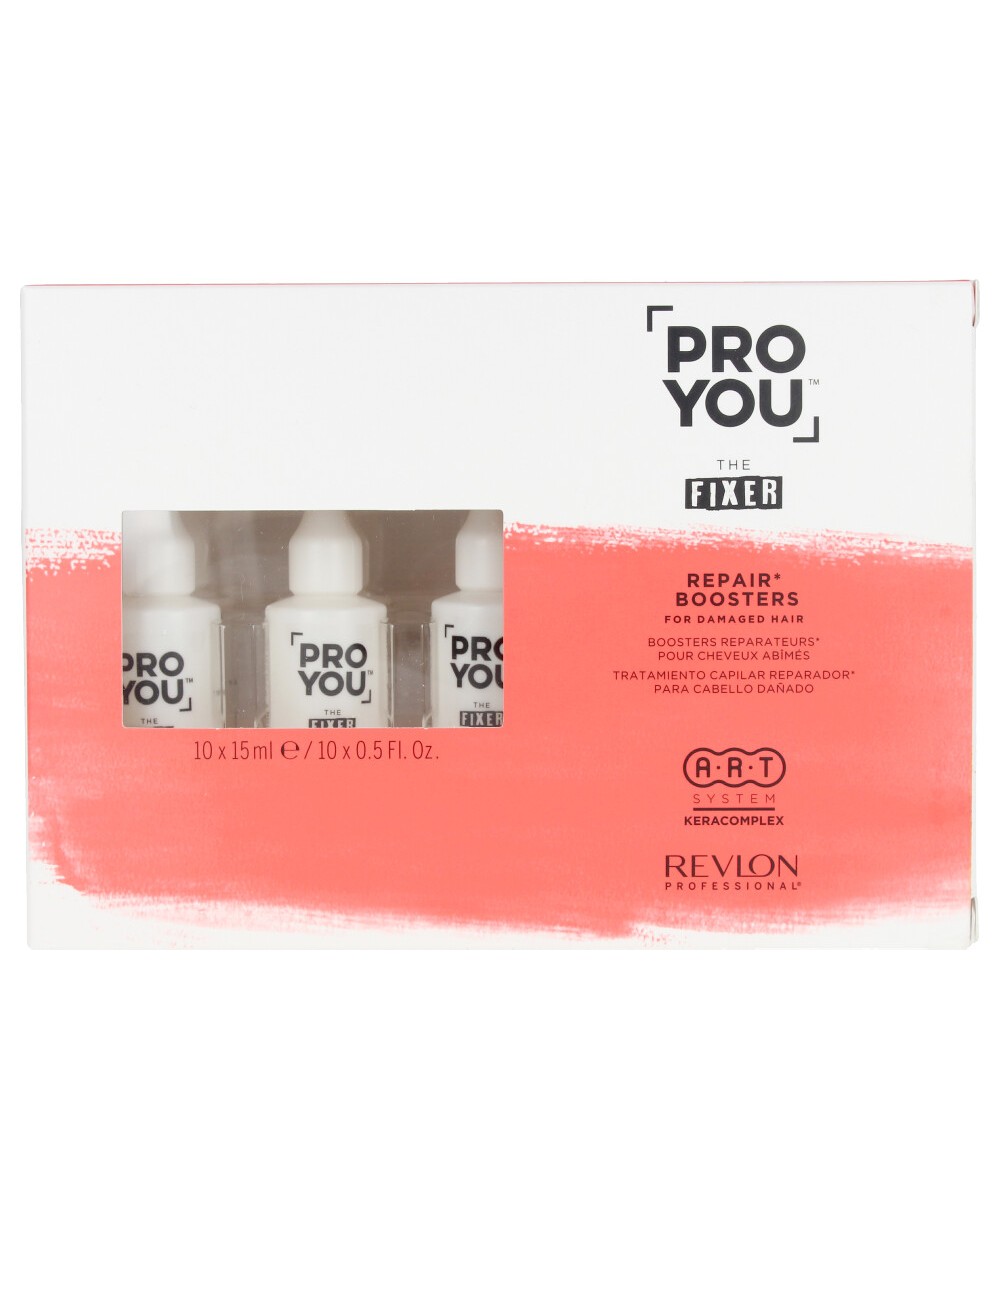 PROYOU the fixer booster 10x15 ml